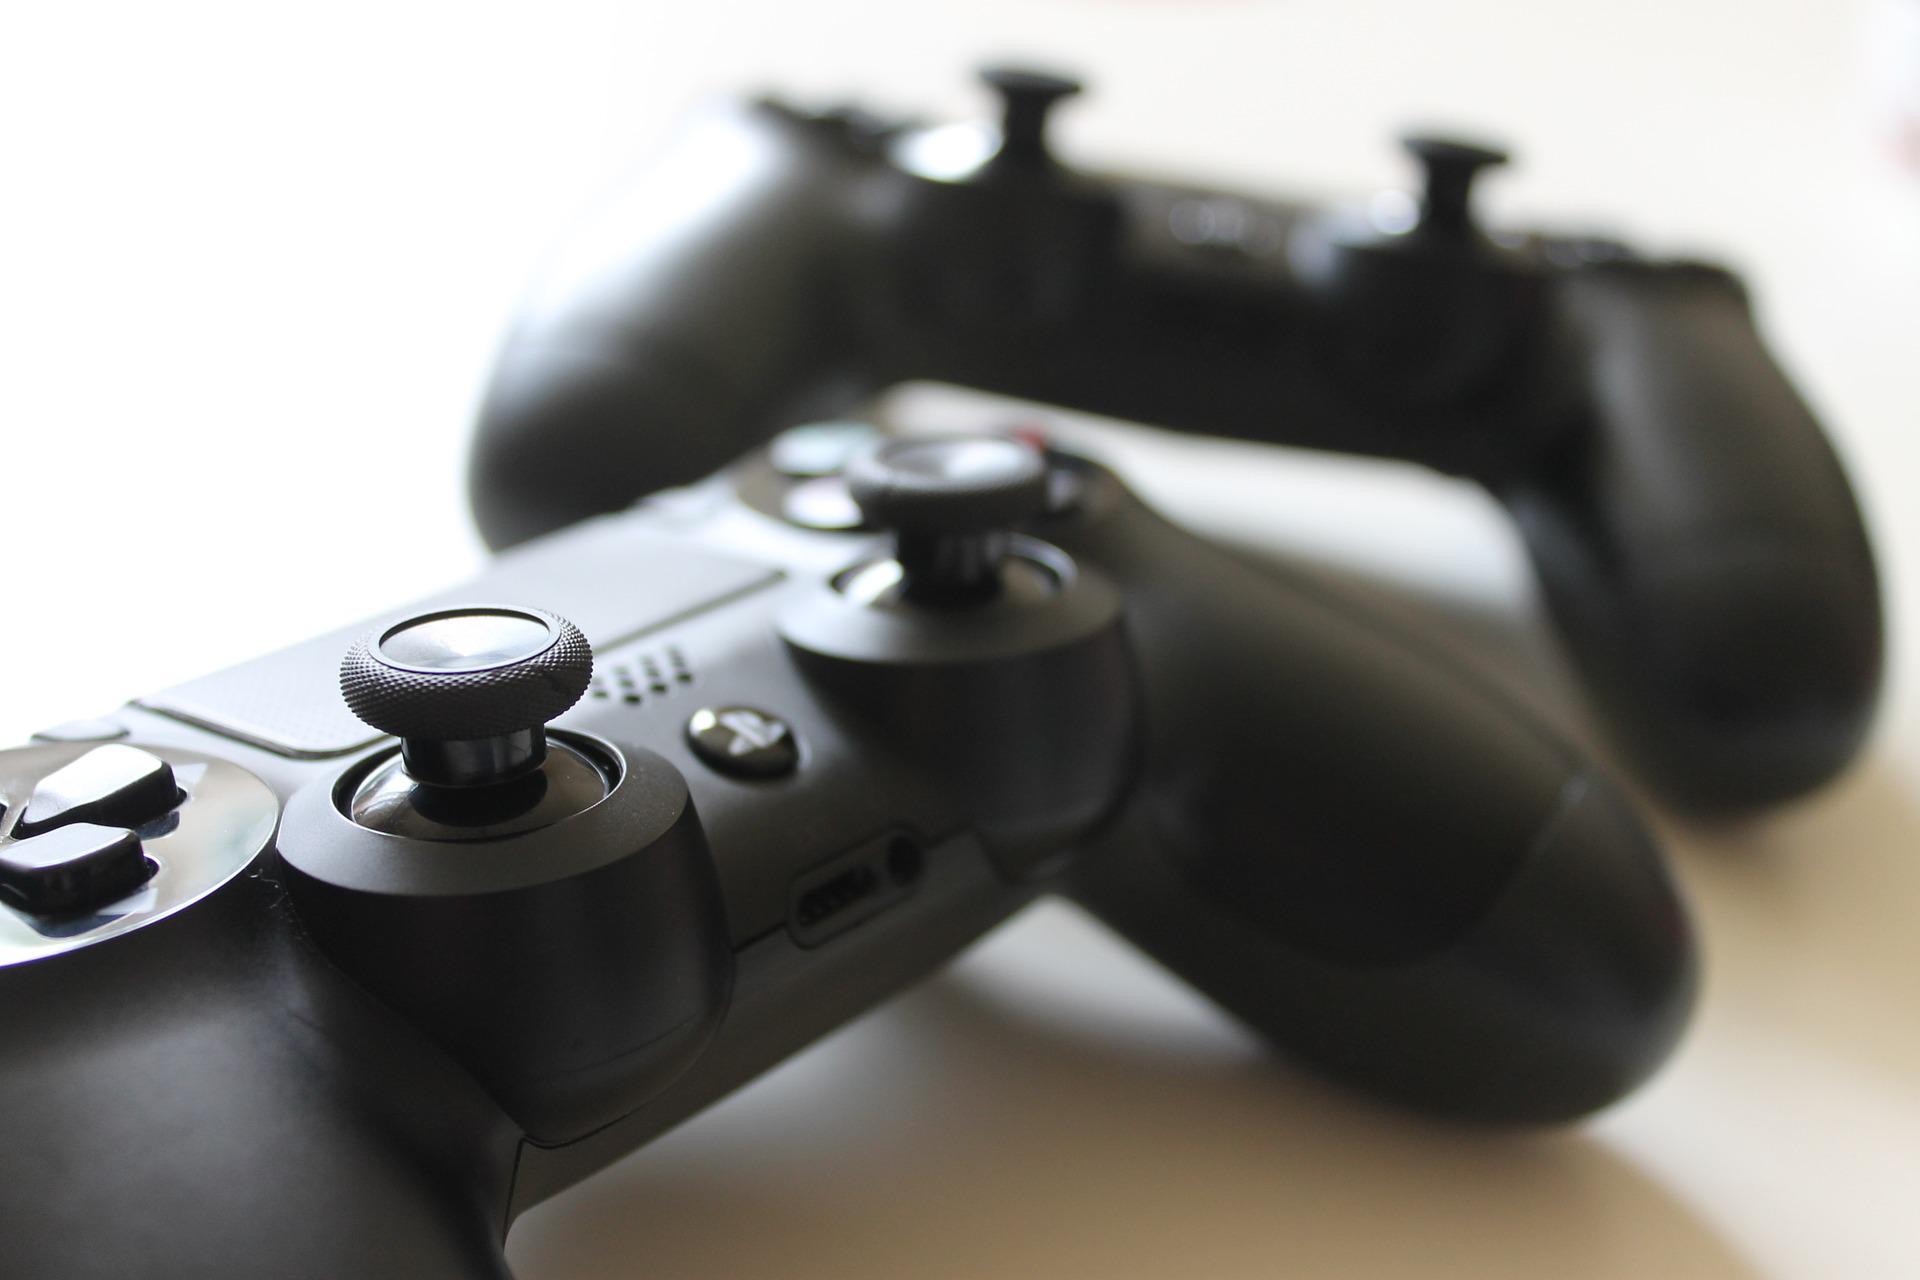 in article about video games, a photo of two video game controllers